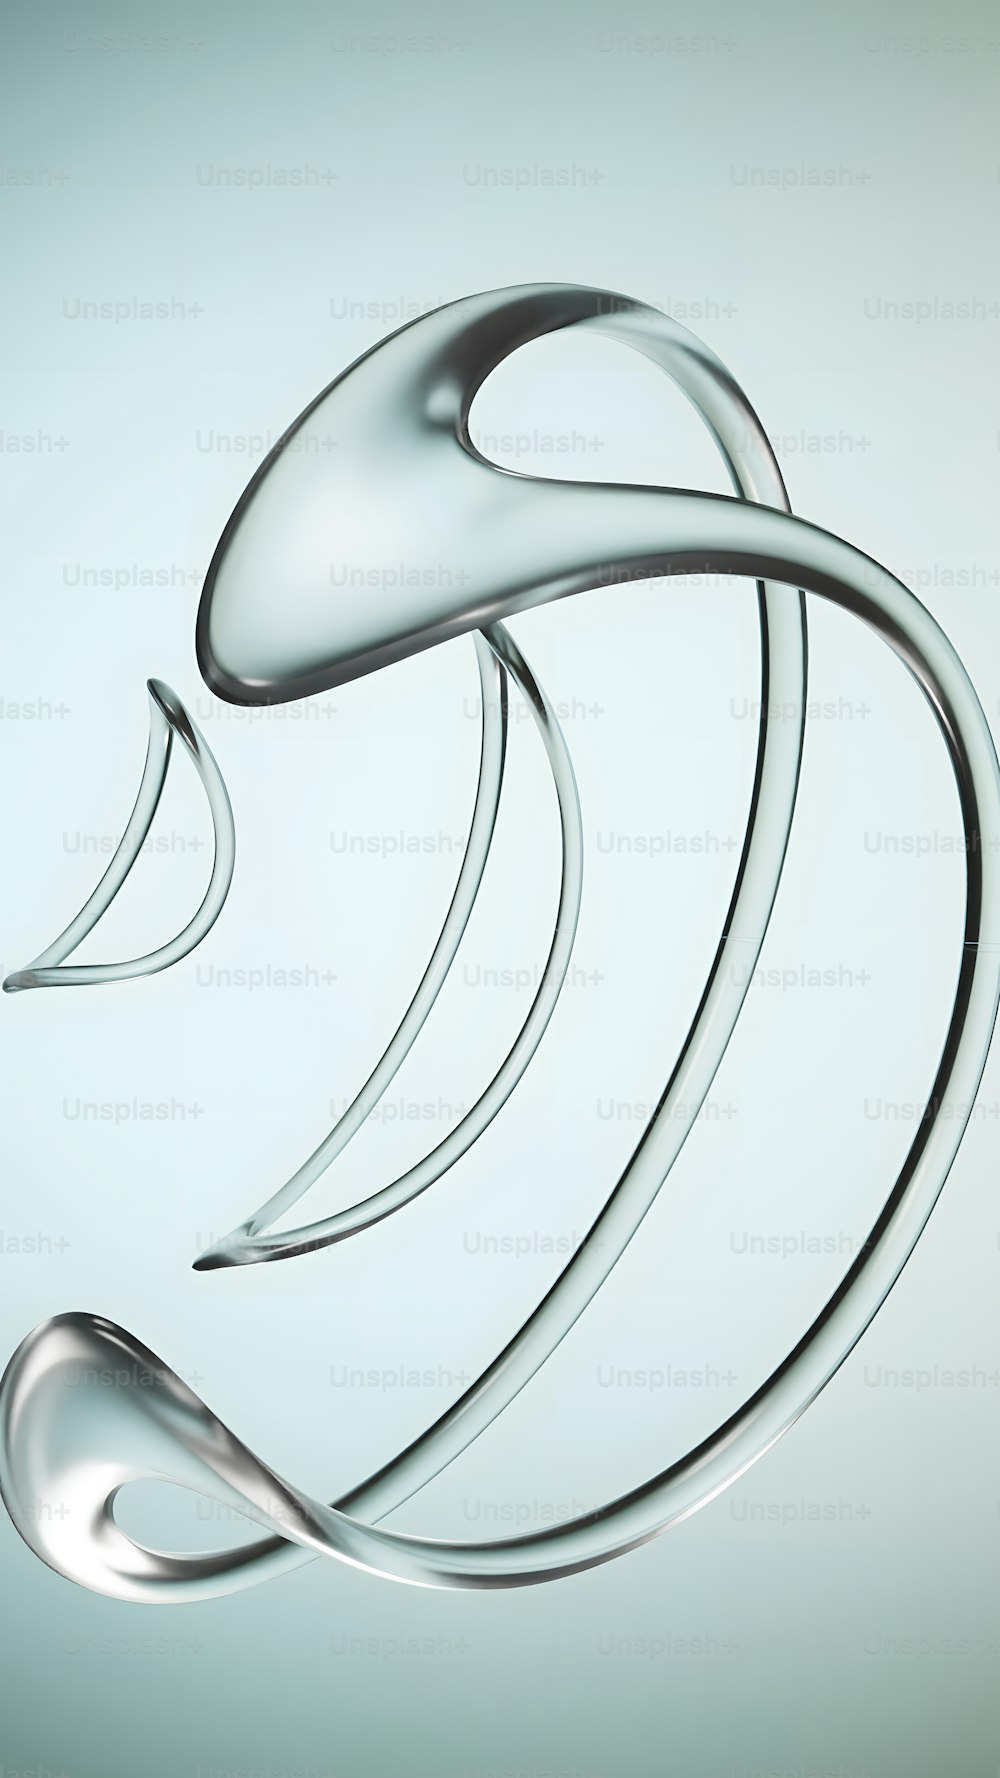 a silver object with a curved design on it